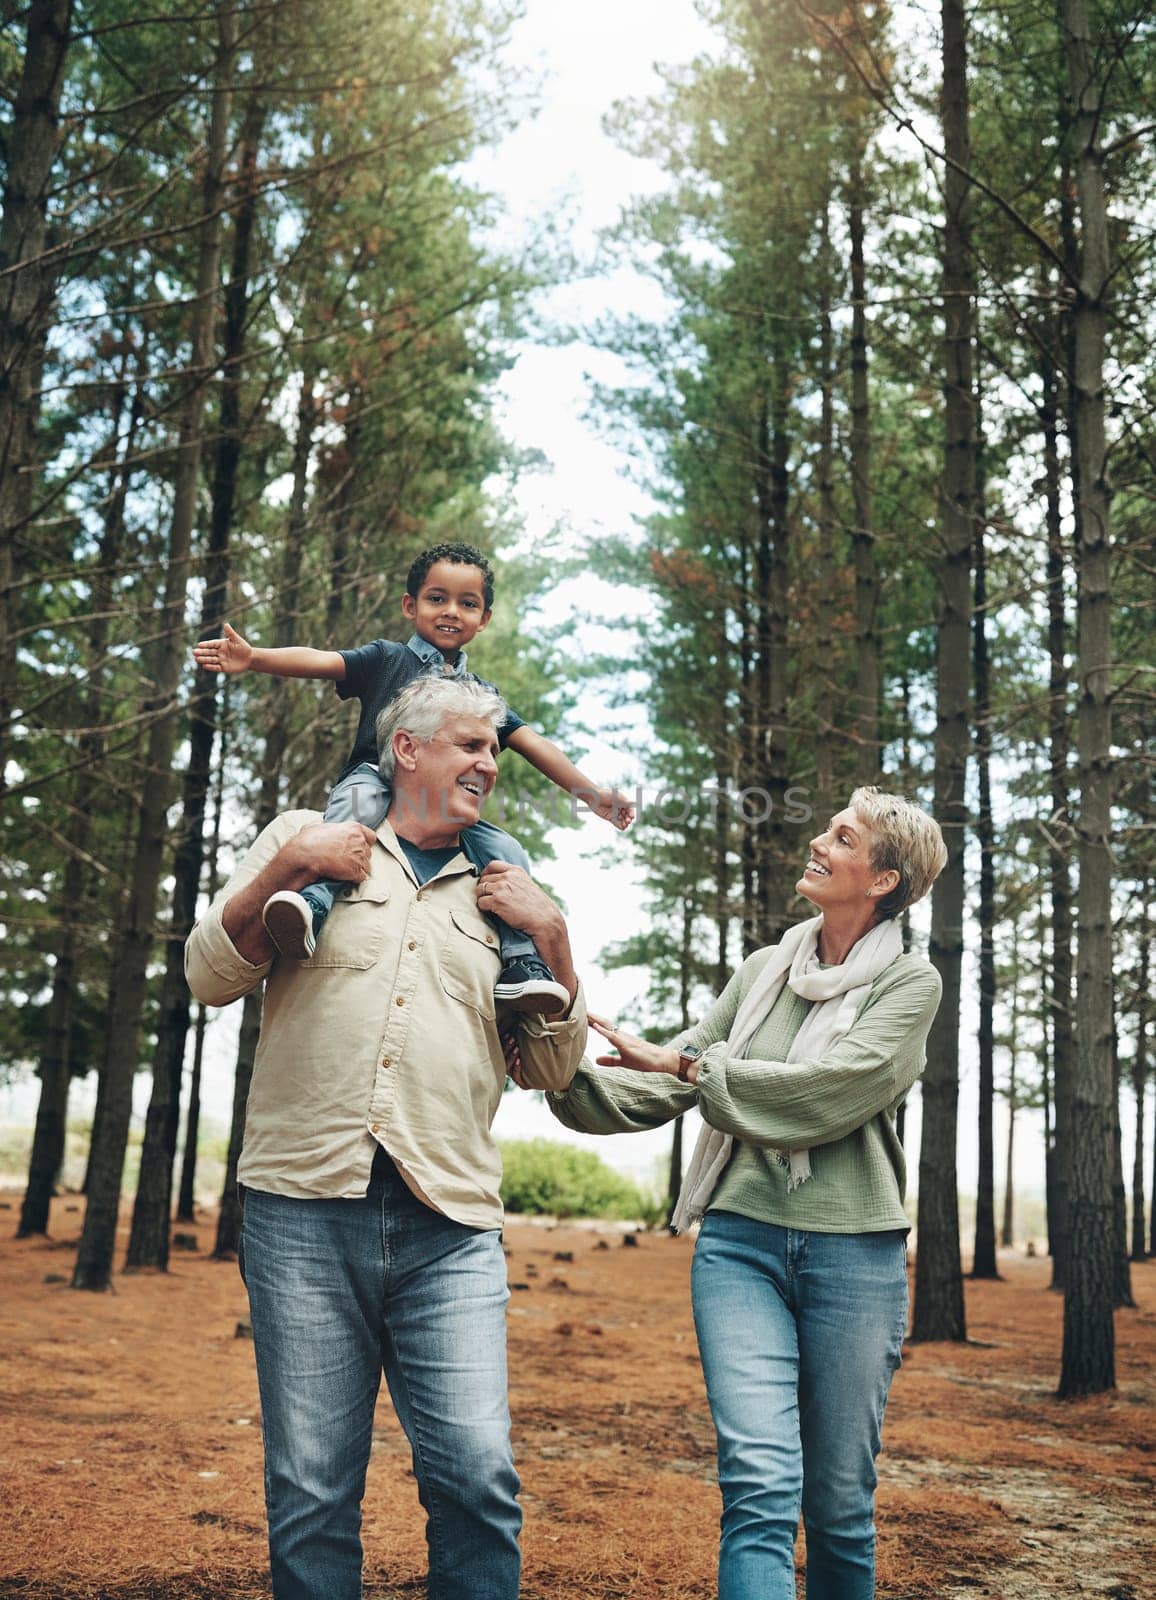 Hike, nature and children with senior foster parents and their adopted son walking on a sand path through the tress. Family, hiking and kids with an elderly man, woman and boy taking a walk outside.